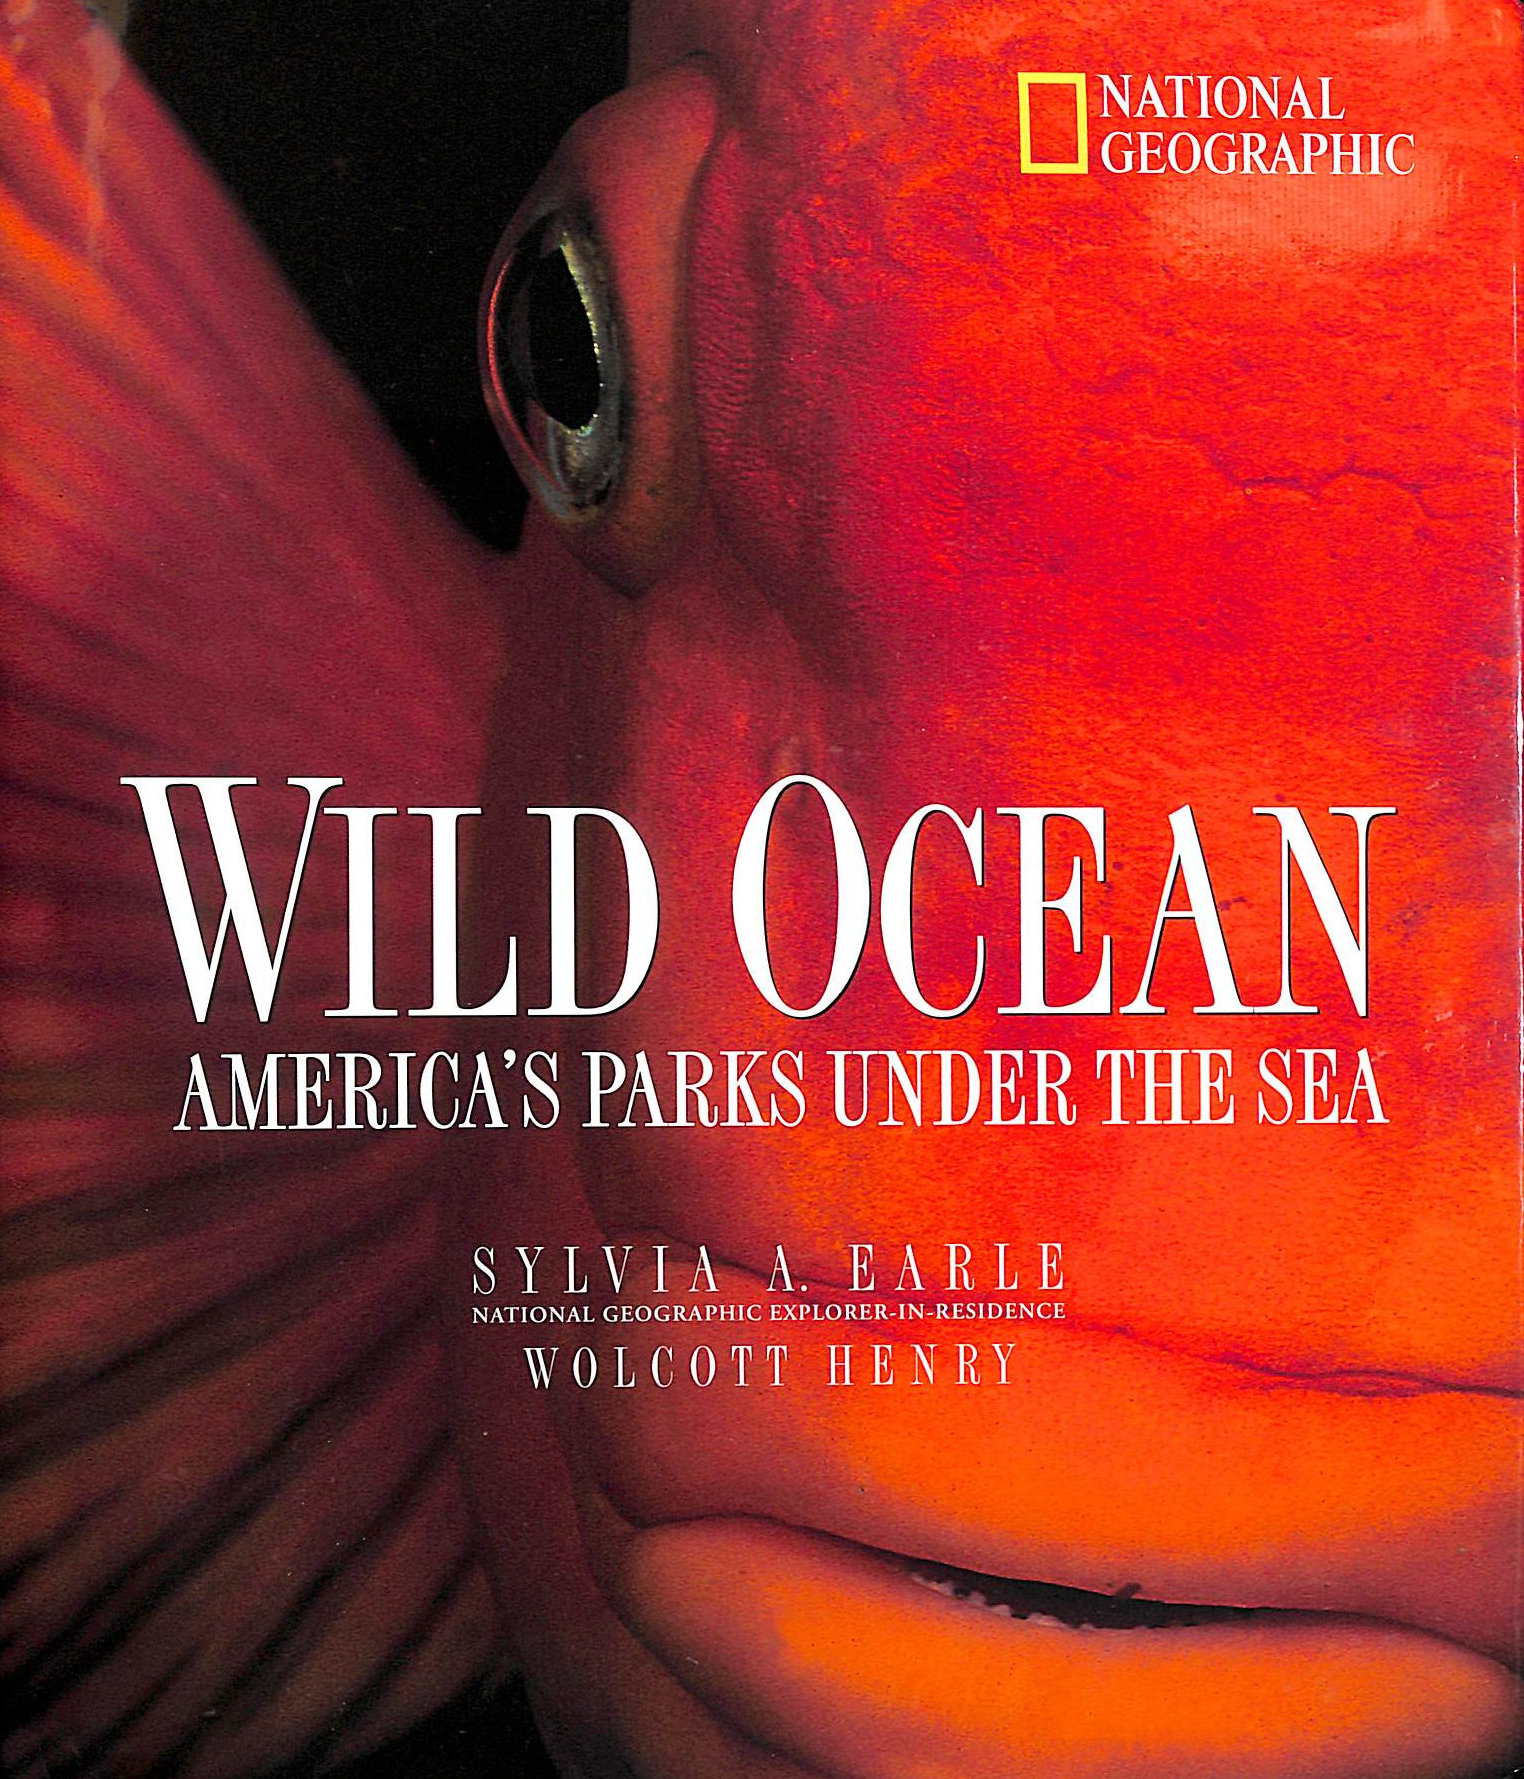 SA EARLE W HENRY - Wild Oceans: America's Parks Under the Sea